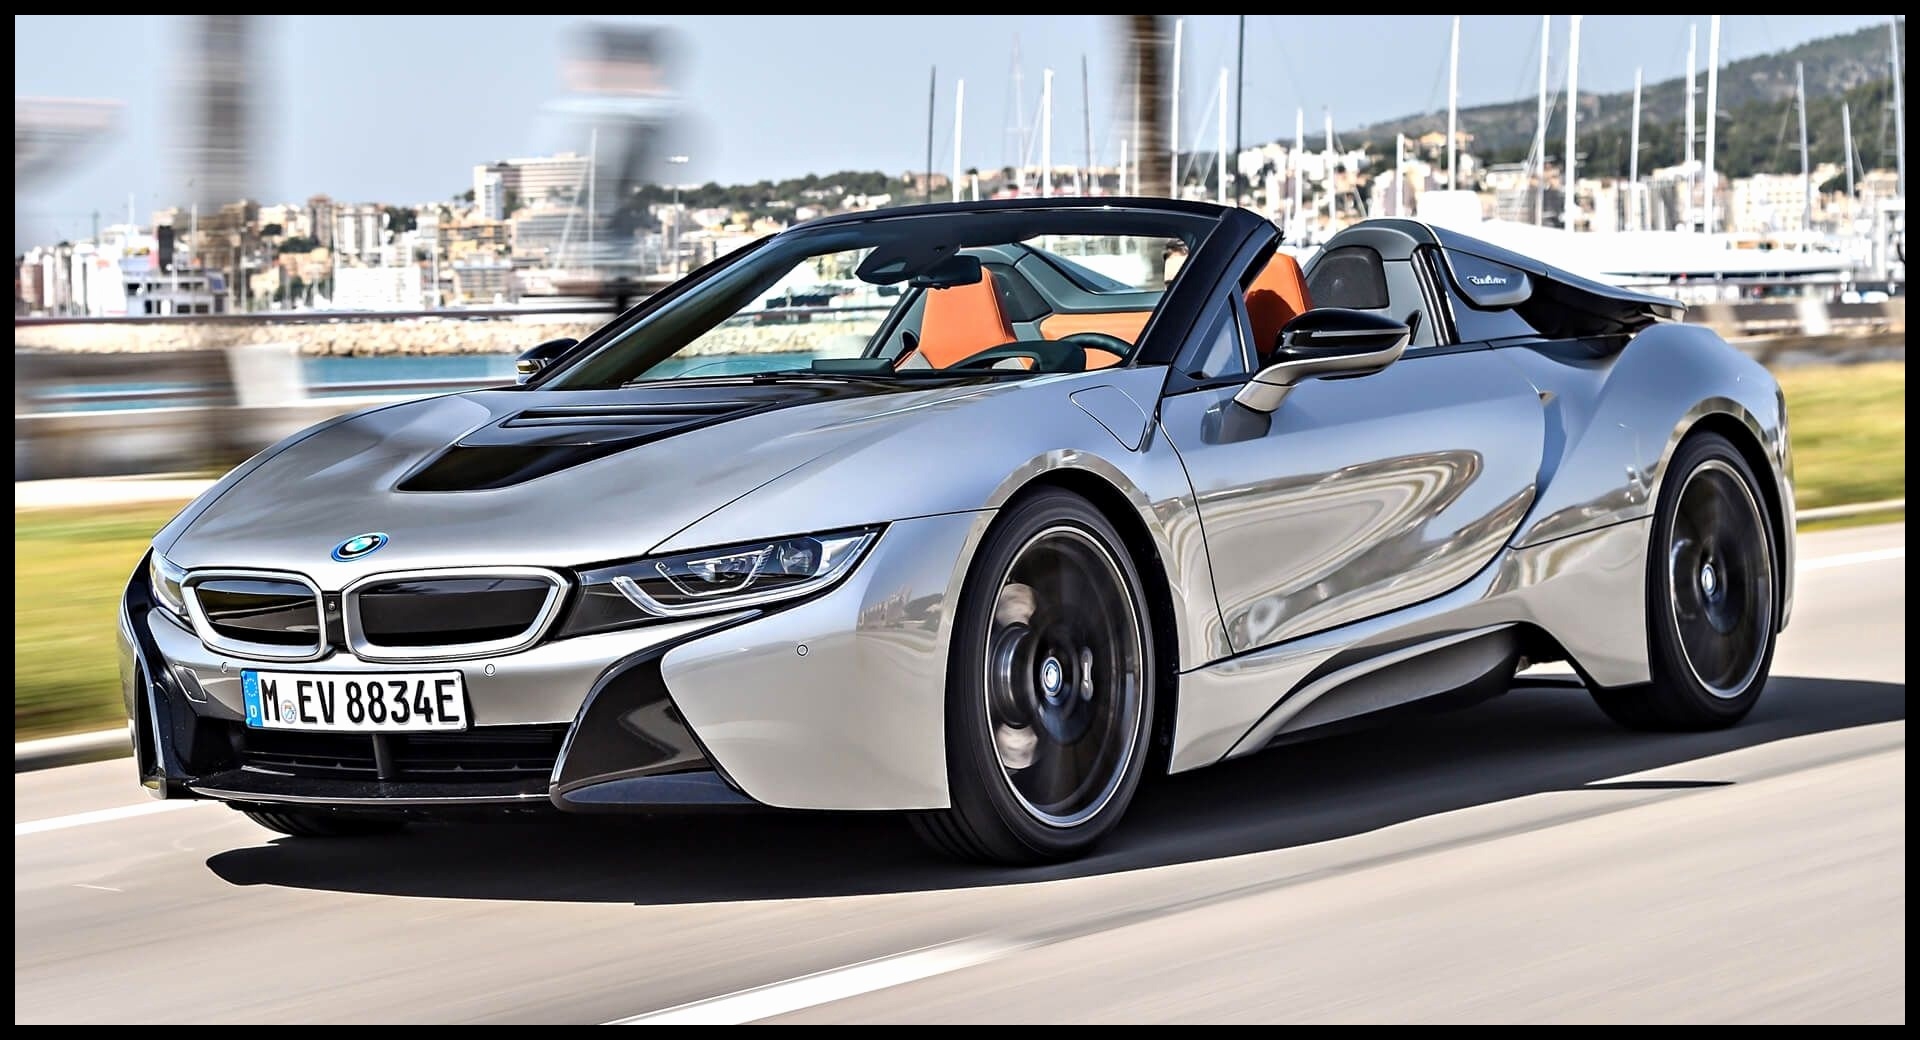 New Bmw Sports Car ing soon Best Luxury Get to Know the New Bmw I8 Roadster